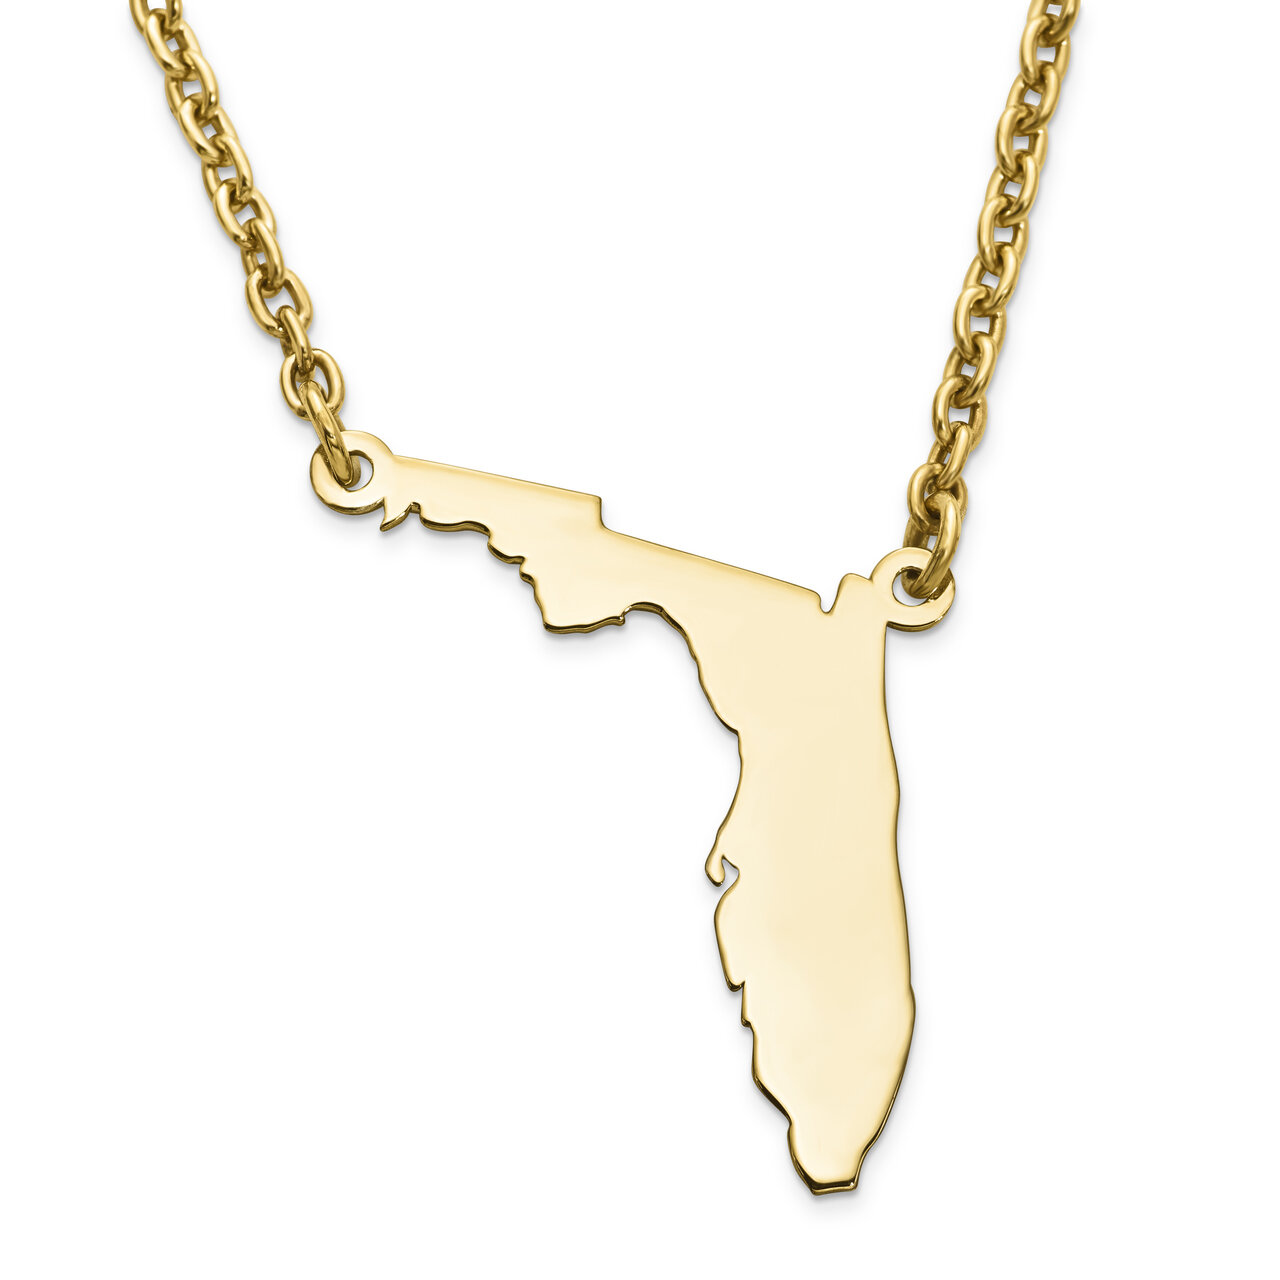 Florida State Pendant Necklace with Chain 14k Yellow Gold Engravable XNA706Y-FL